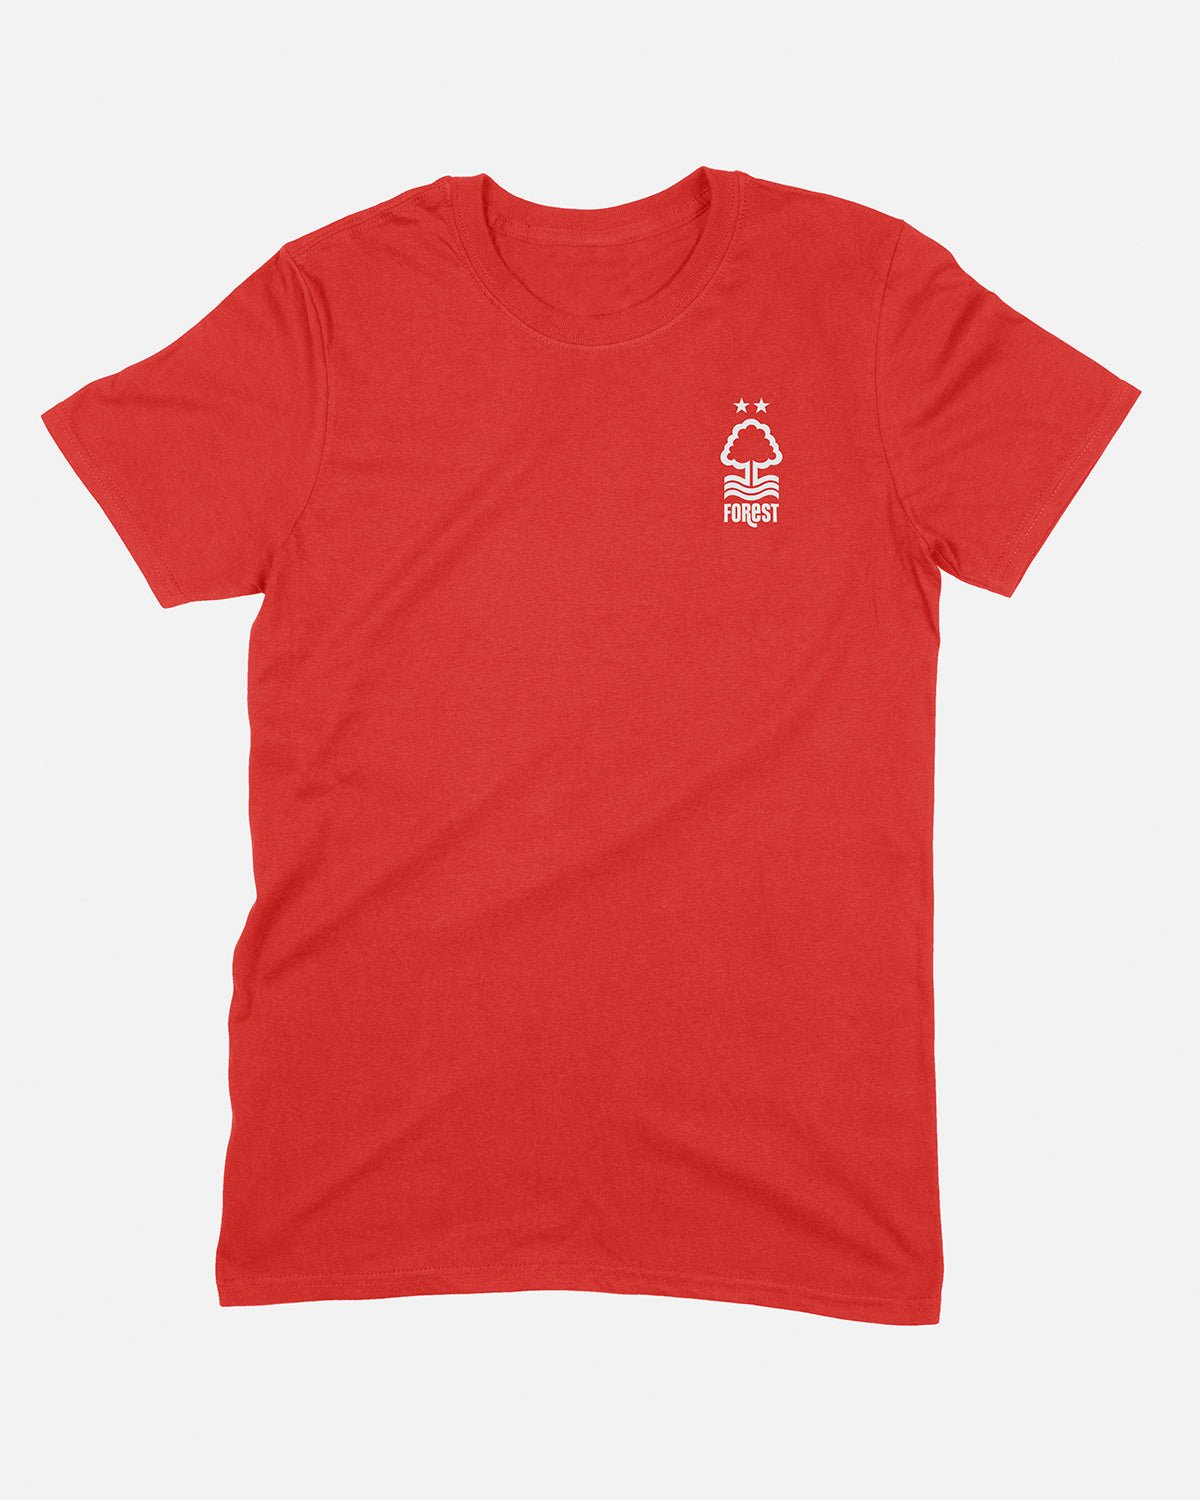 NFFC Classic Red T-Shirt - Nottingham Forest FC